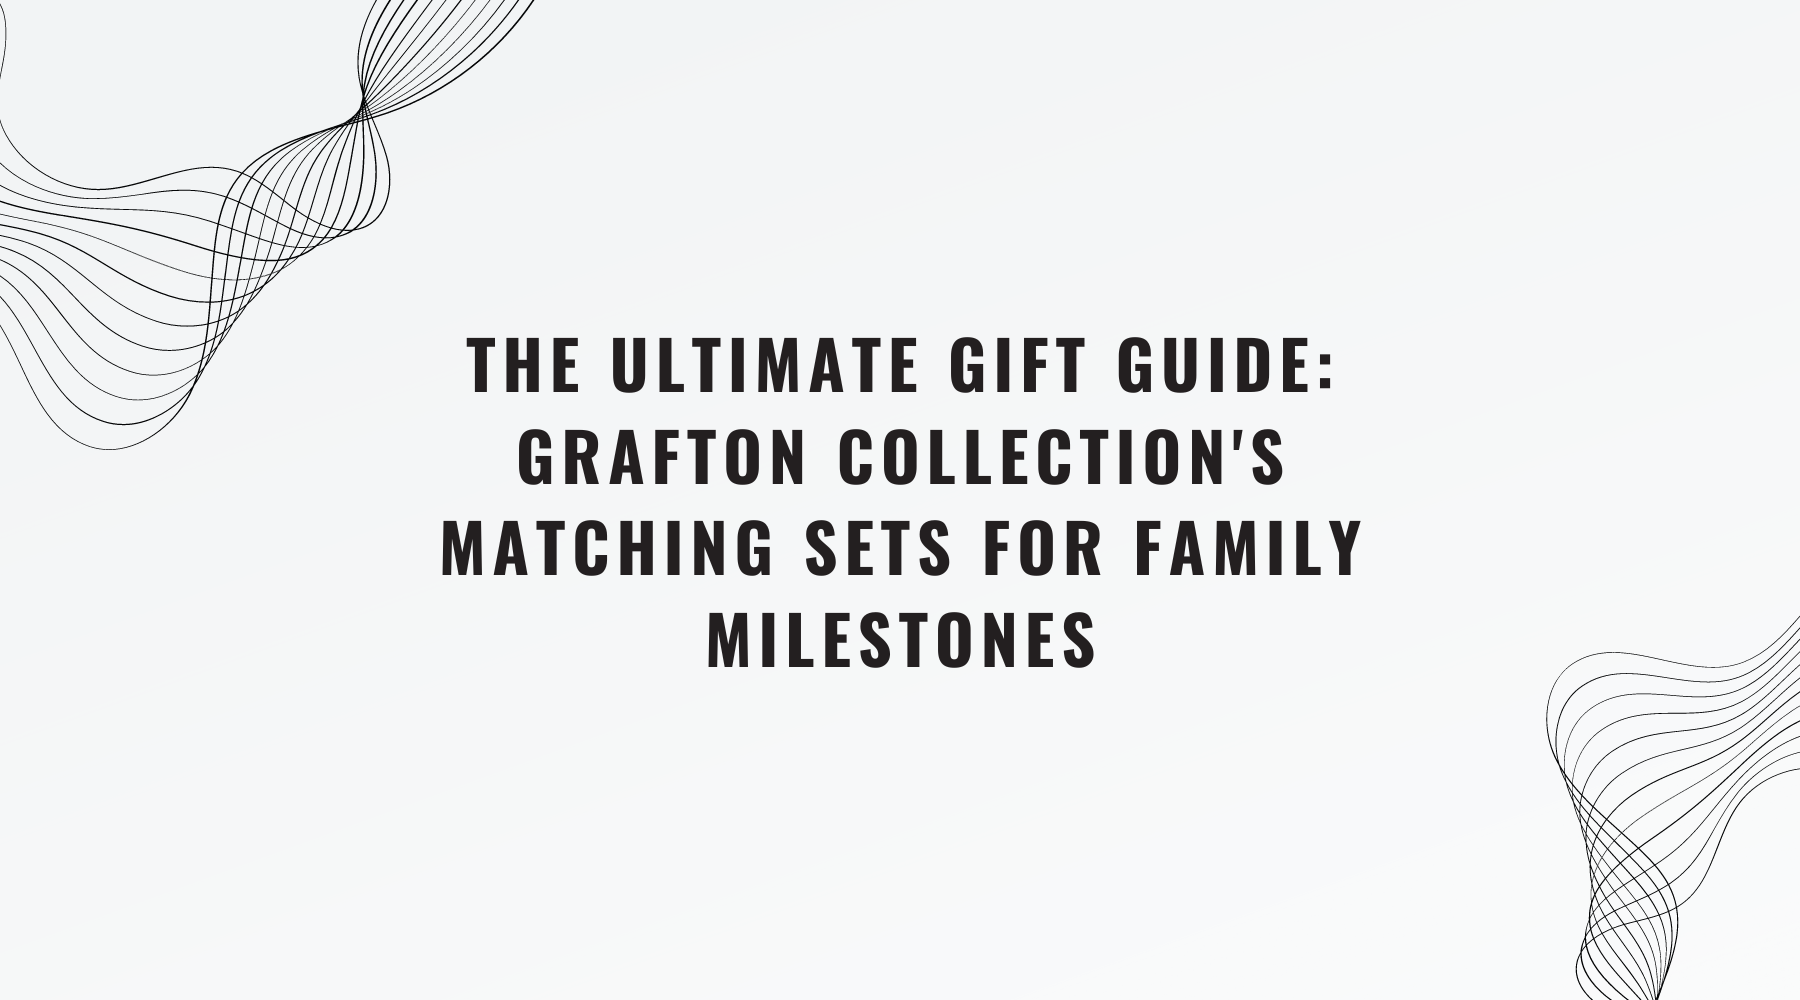 The Ultimate Gift Guide: Grafton Collection's Matching Sets for Family Milestones